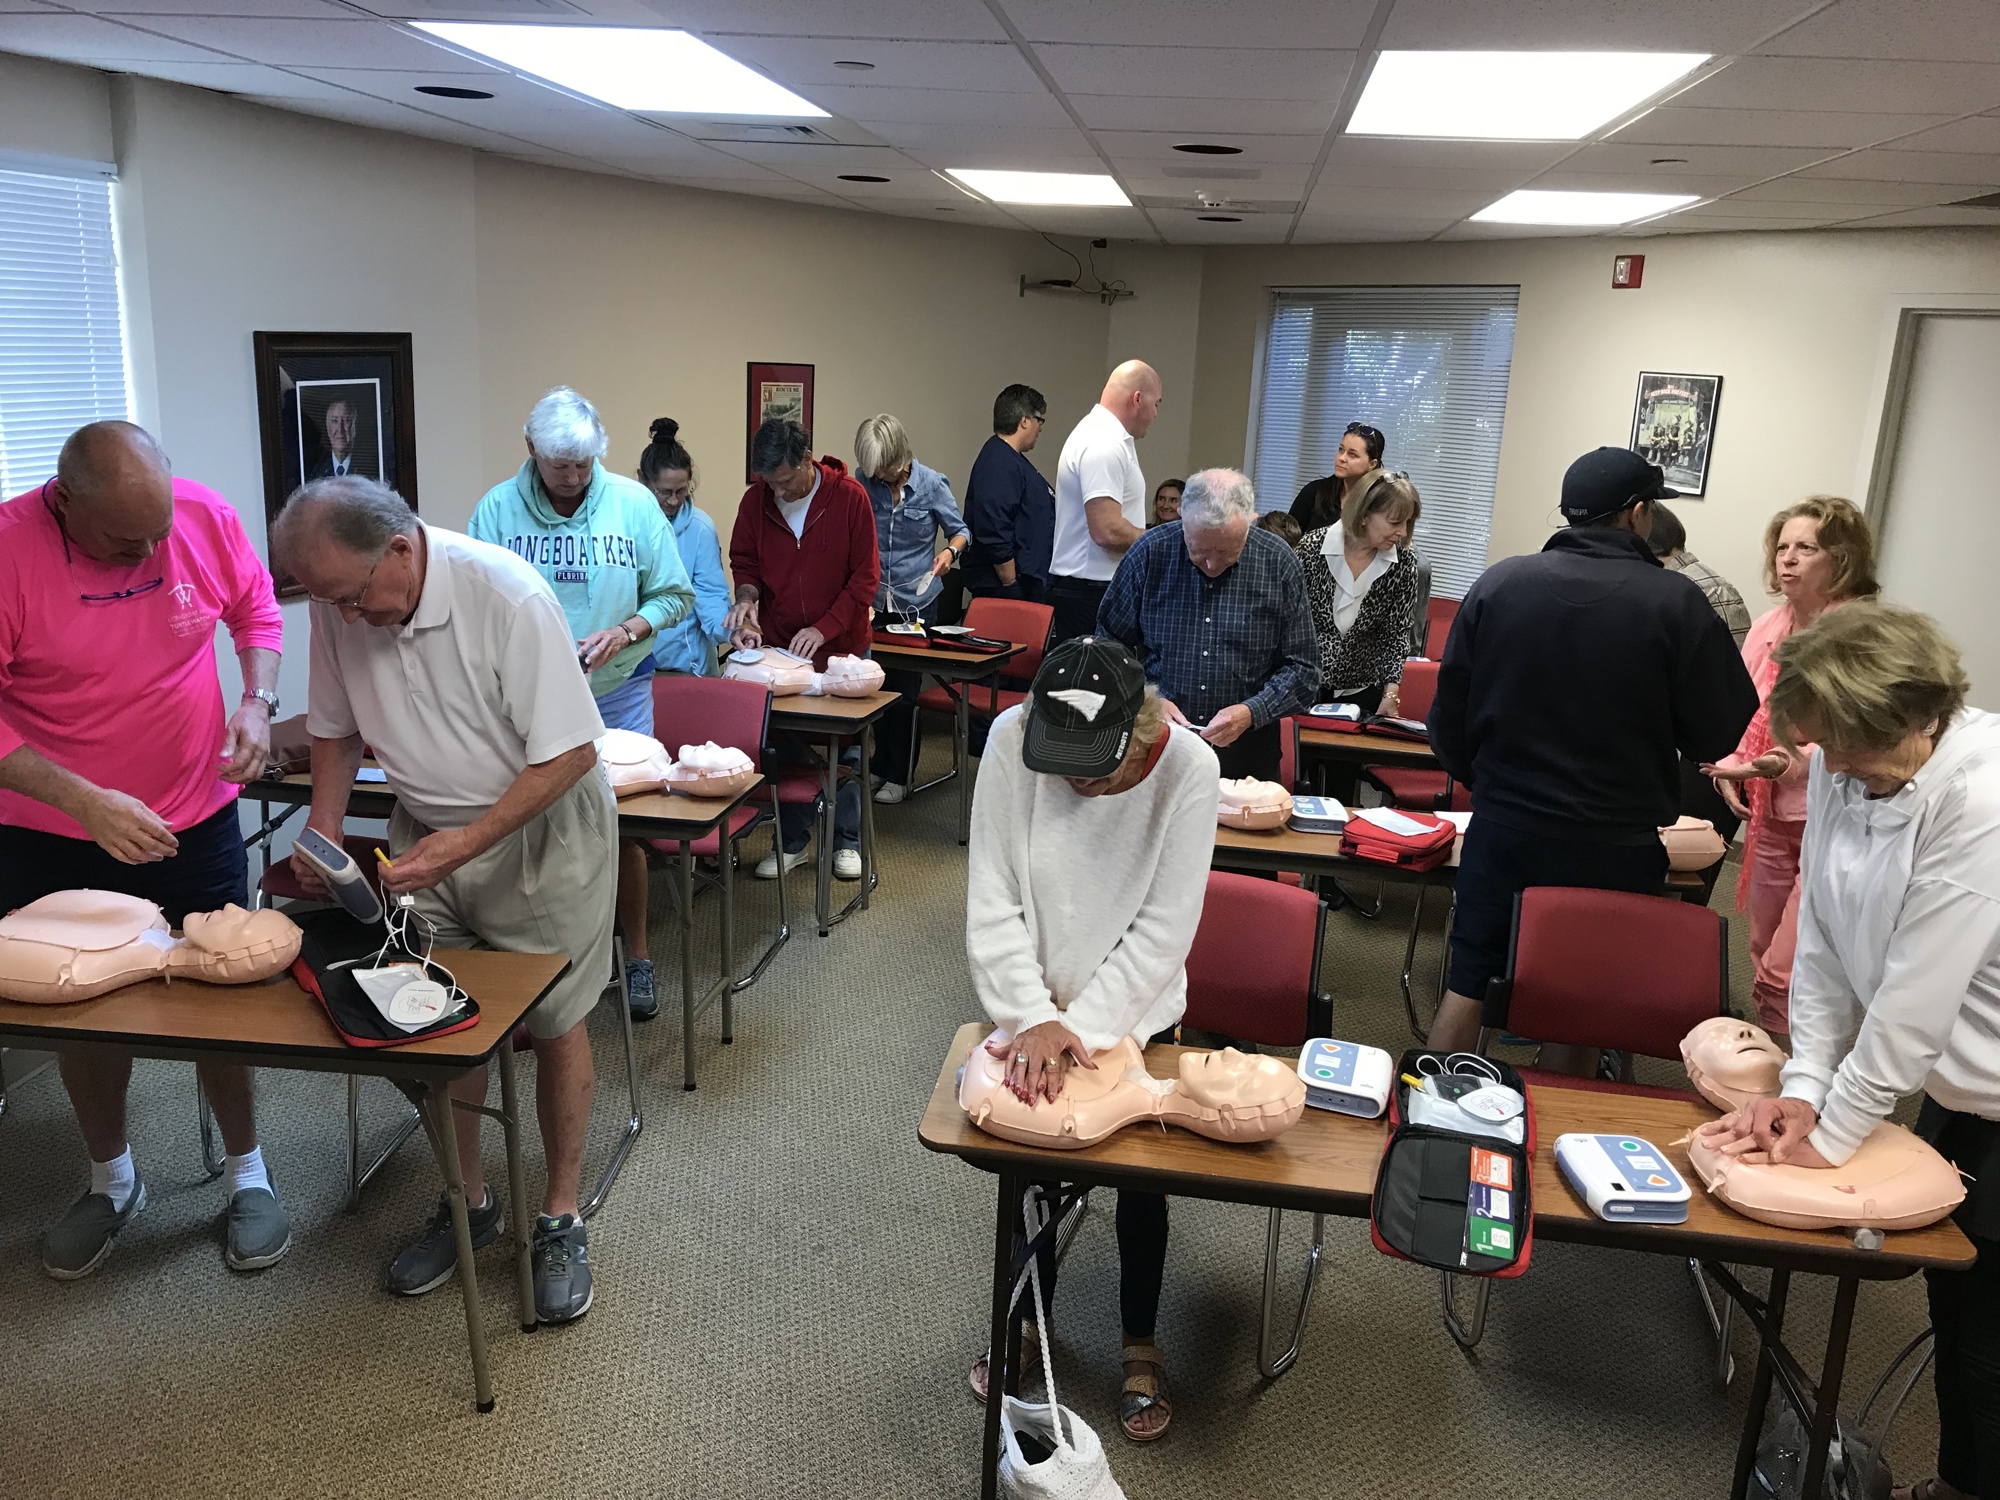 A CPR training session held by the Longboat Key Fire Rescue Department. (Courtesy of the Longboat Key Fire Rescue Department)